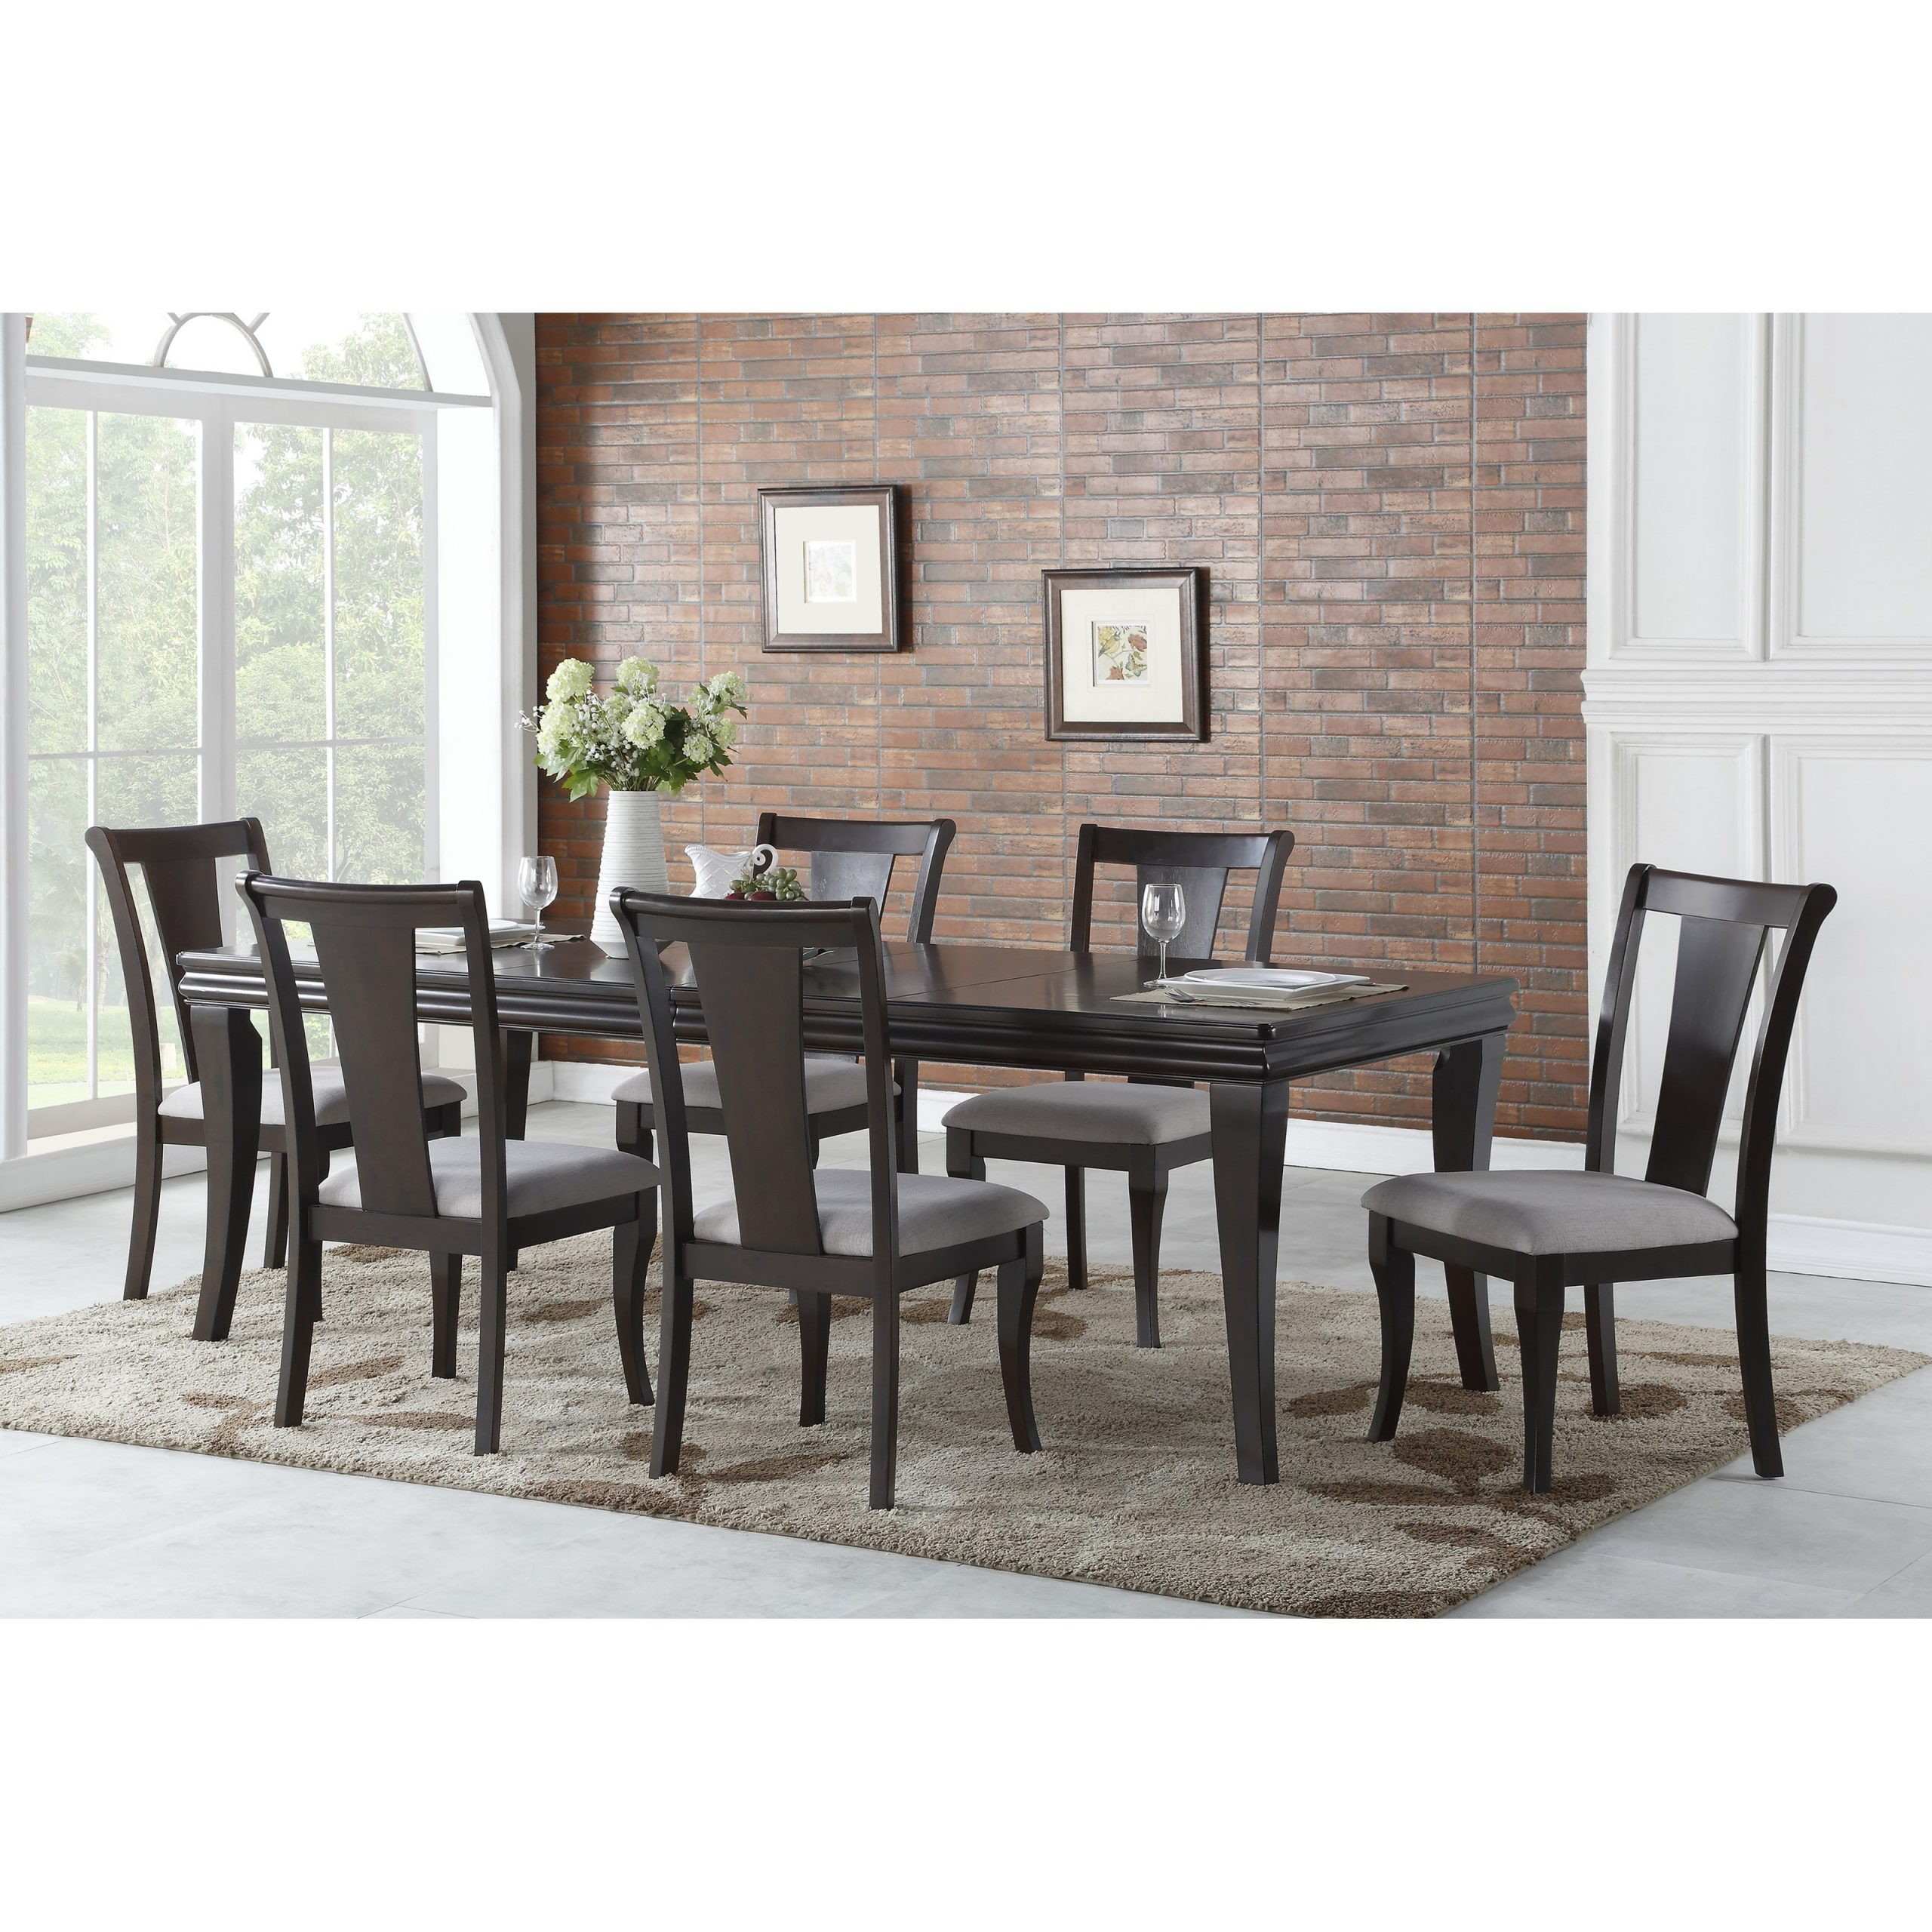 Steve Silver Aubrey Transitional Dining Room Set Northeast with measurements 3200 X 3200